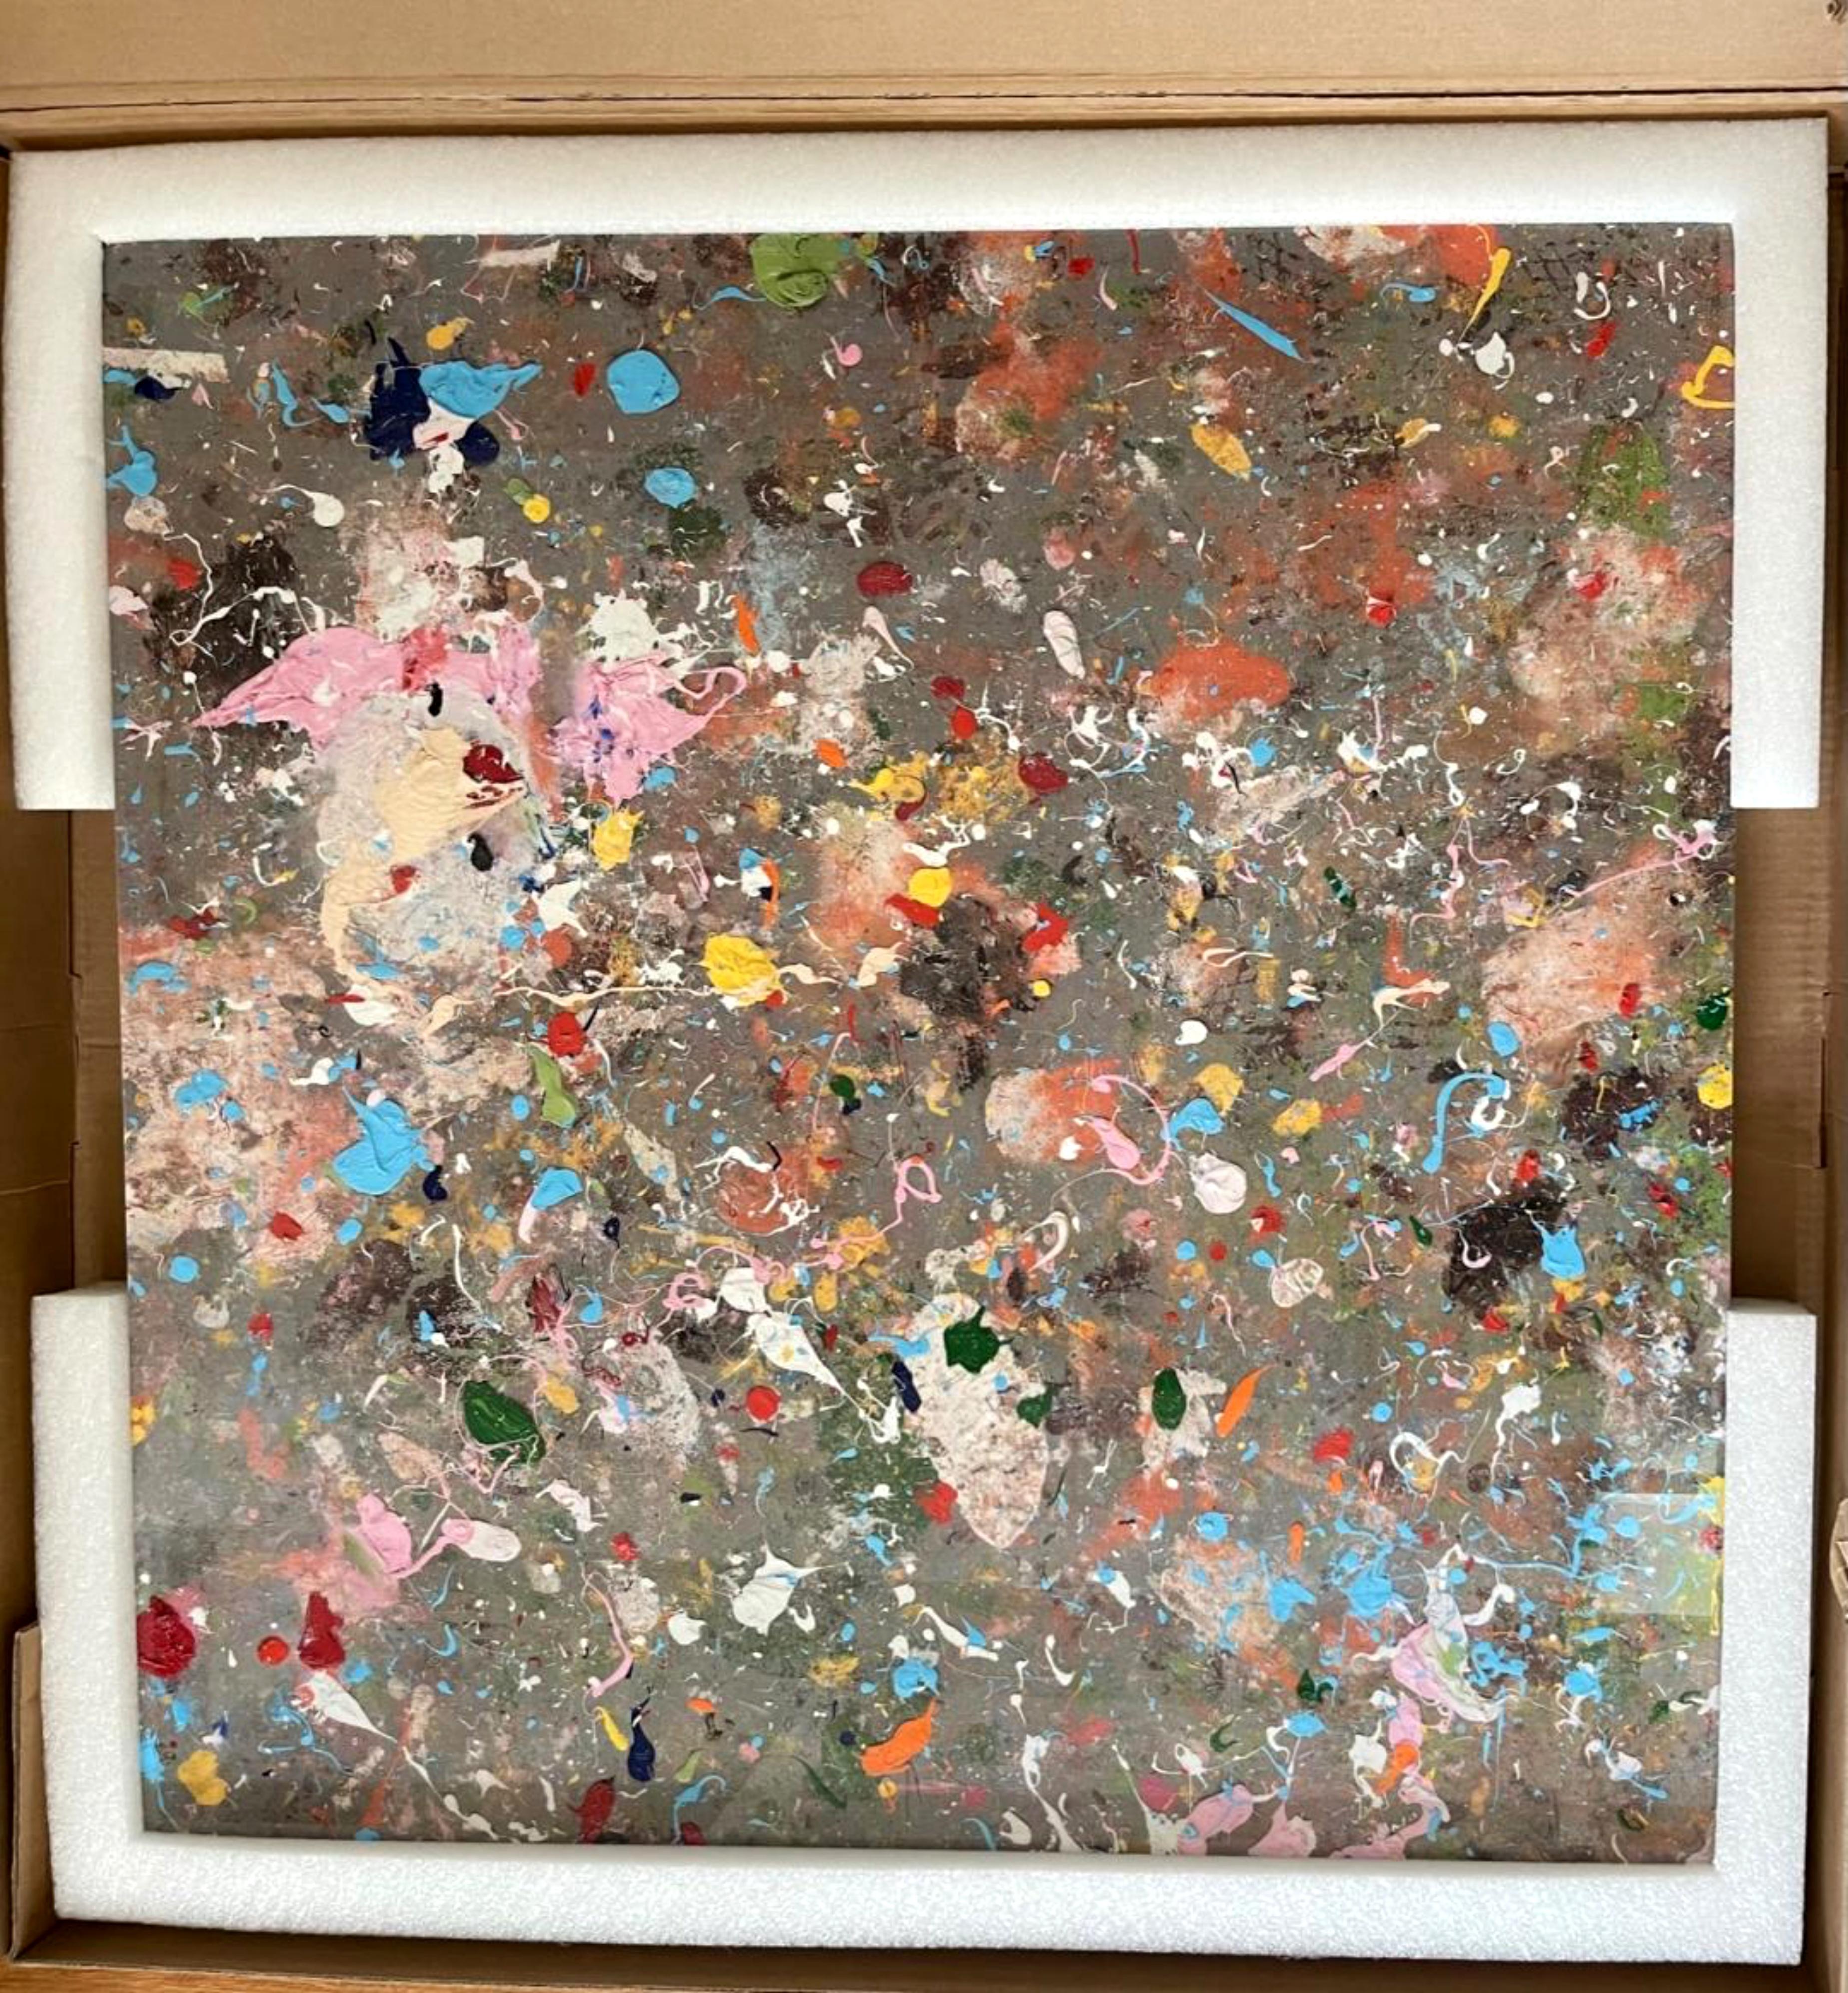 Mill Bay, Salcombe, H13-7, from Where the Land Meets the Sea (mixed media work) - Abstract Print by Damien Hirst